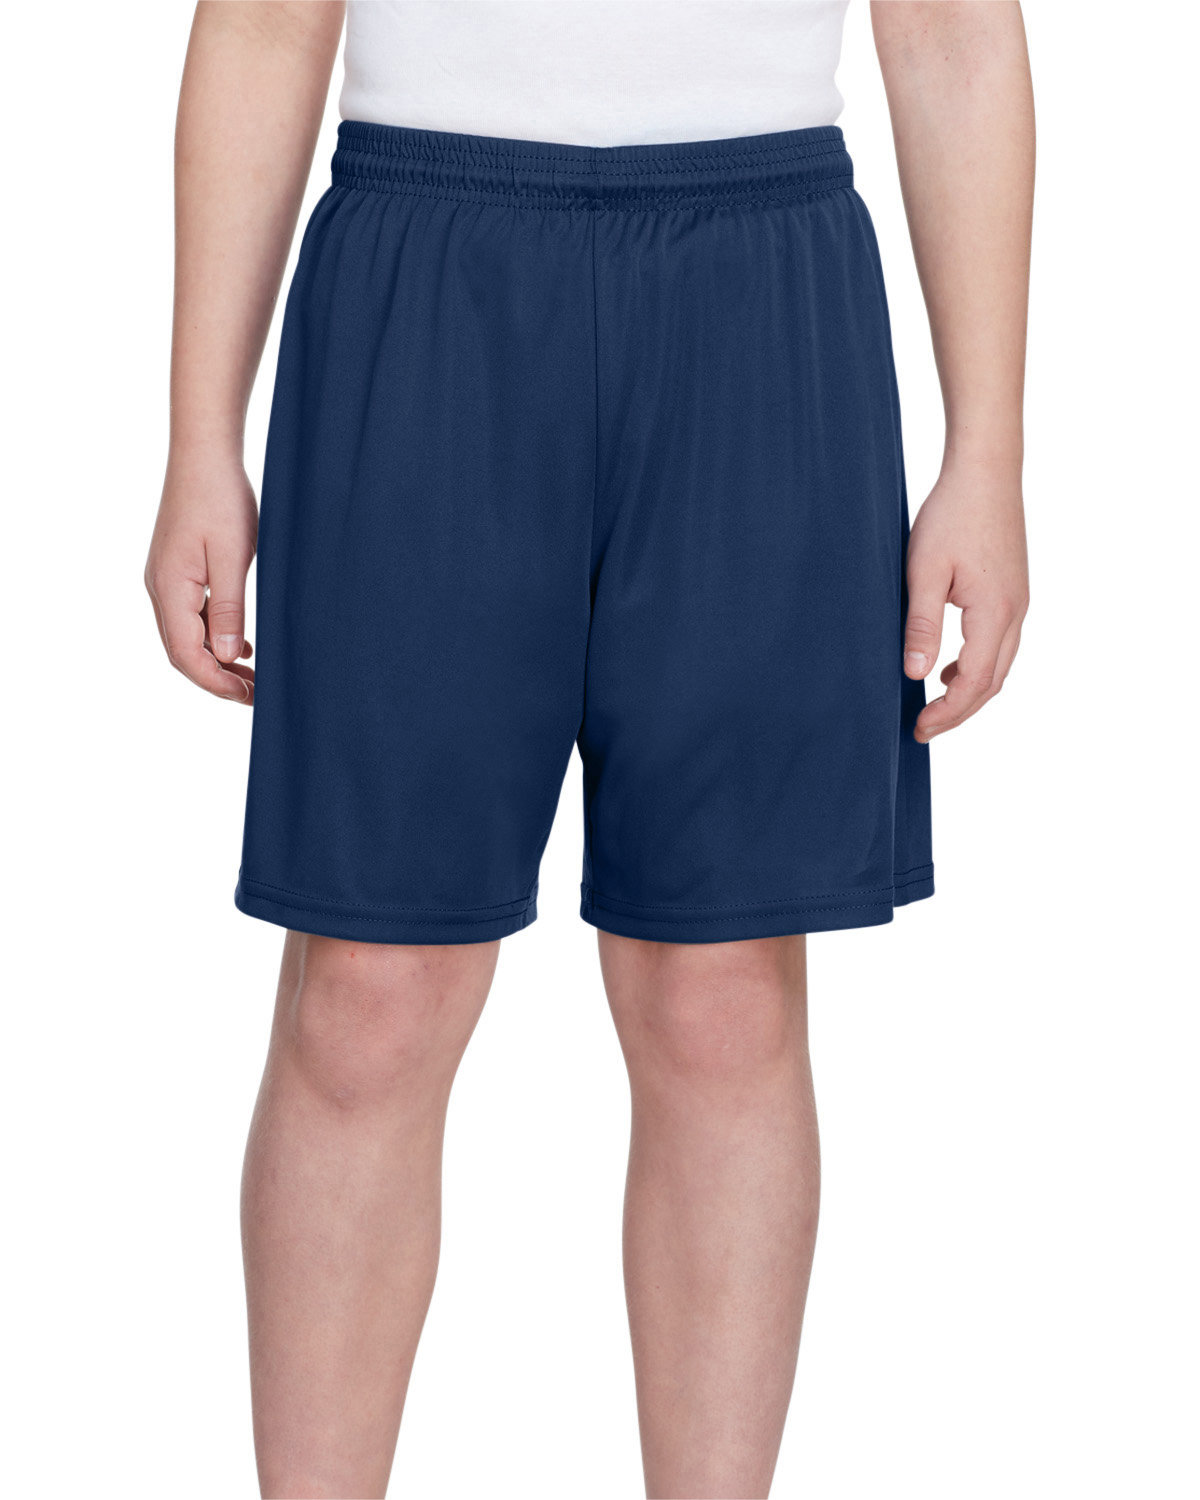 A4 Youth Cooling Performance Polyester Short NAVY 